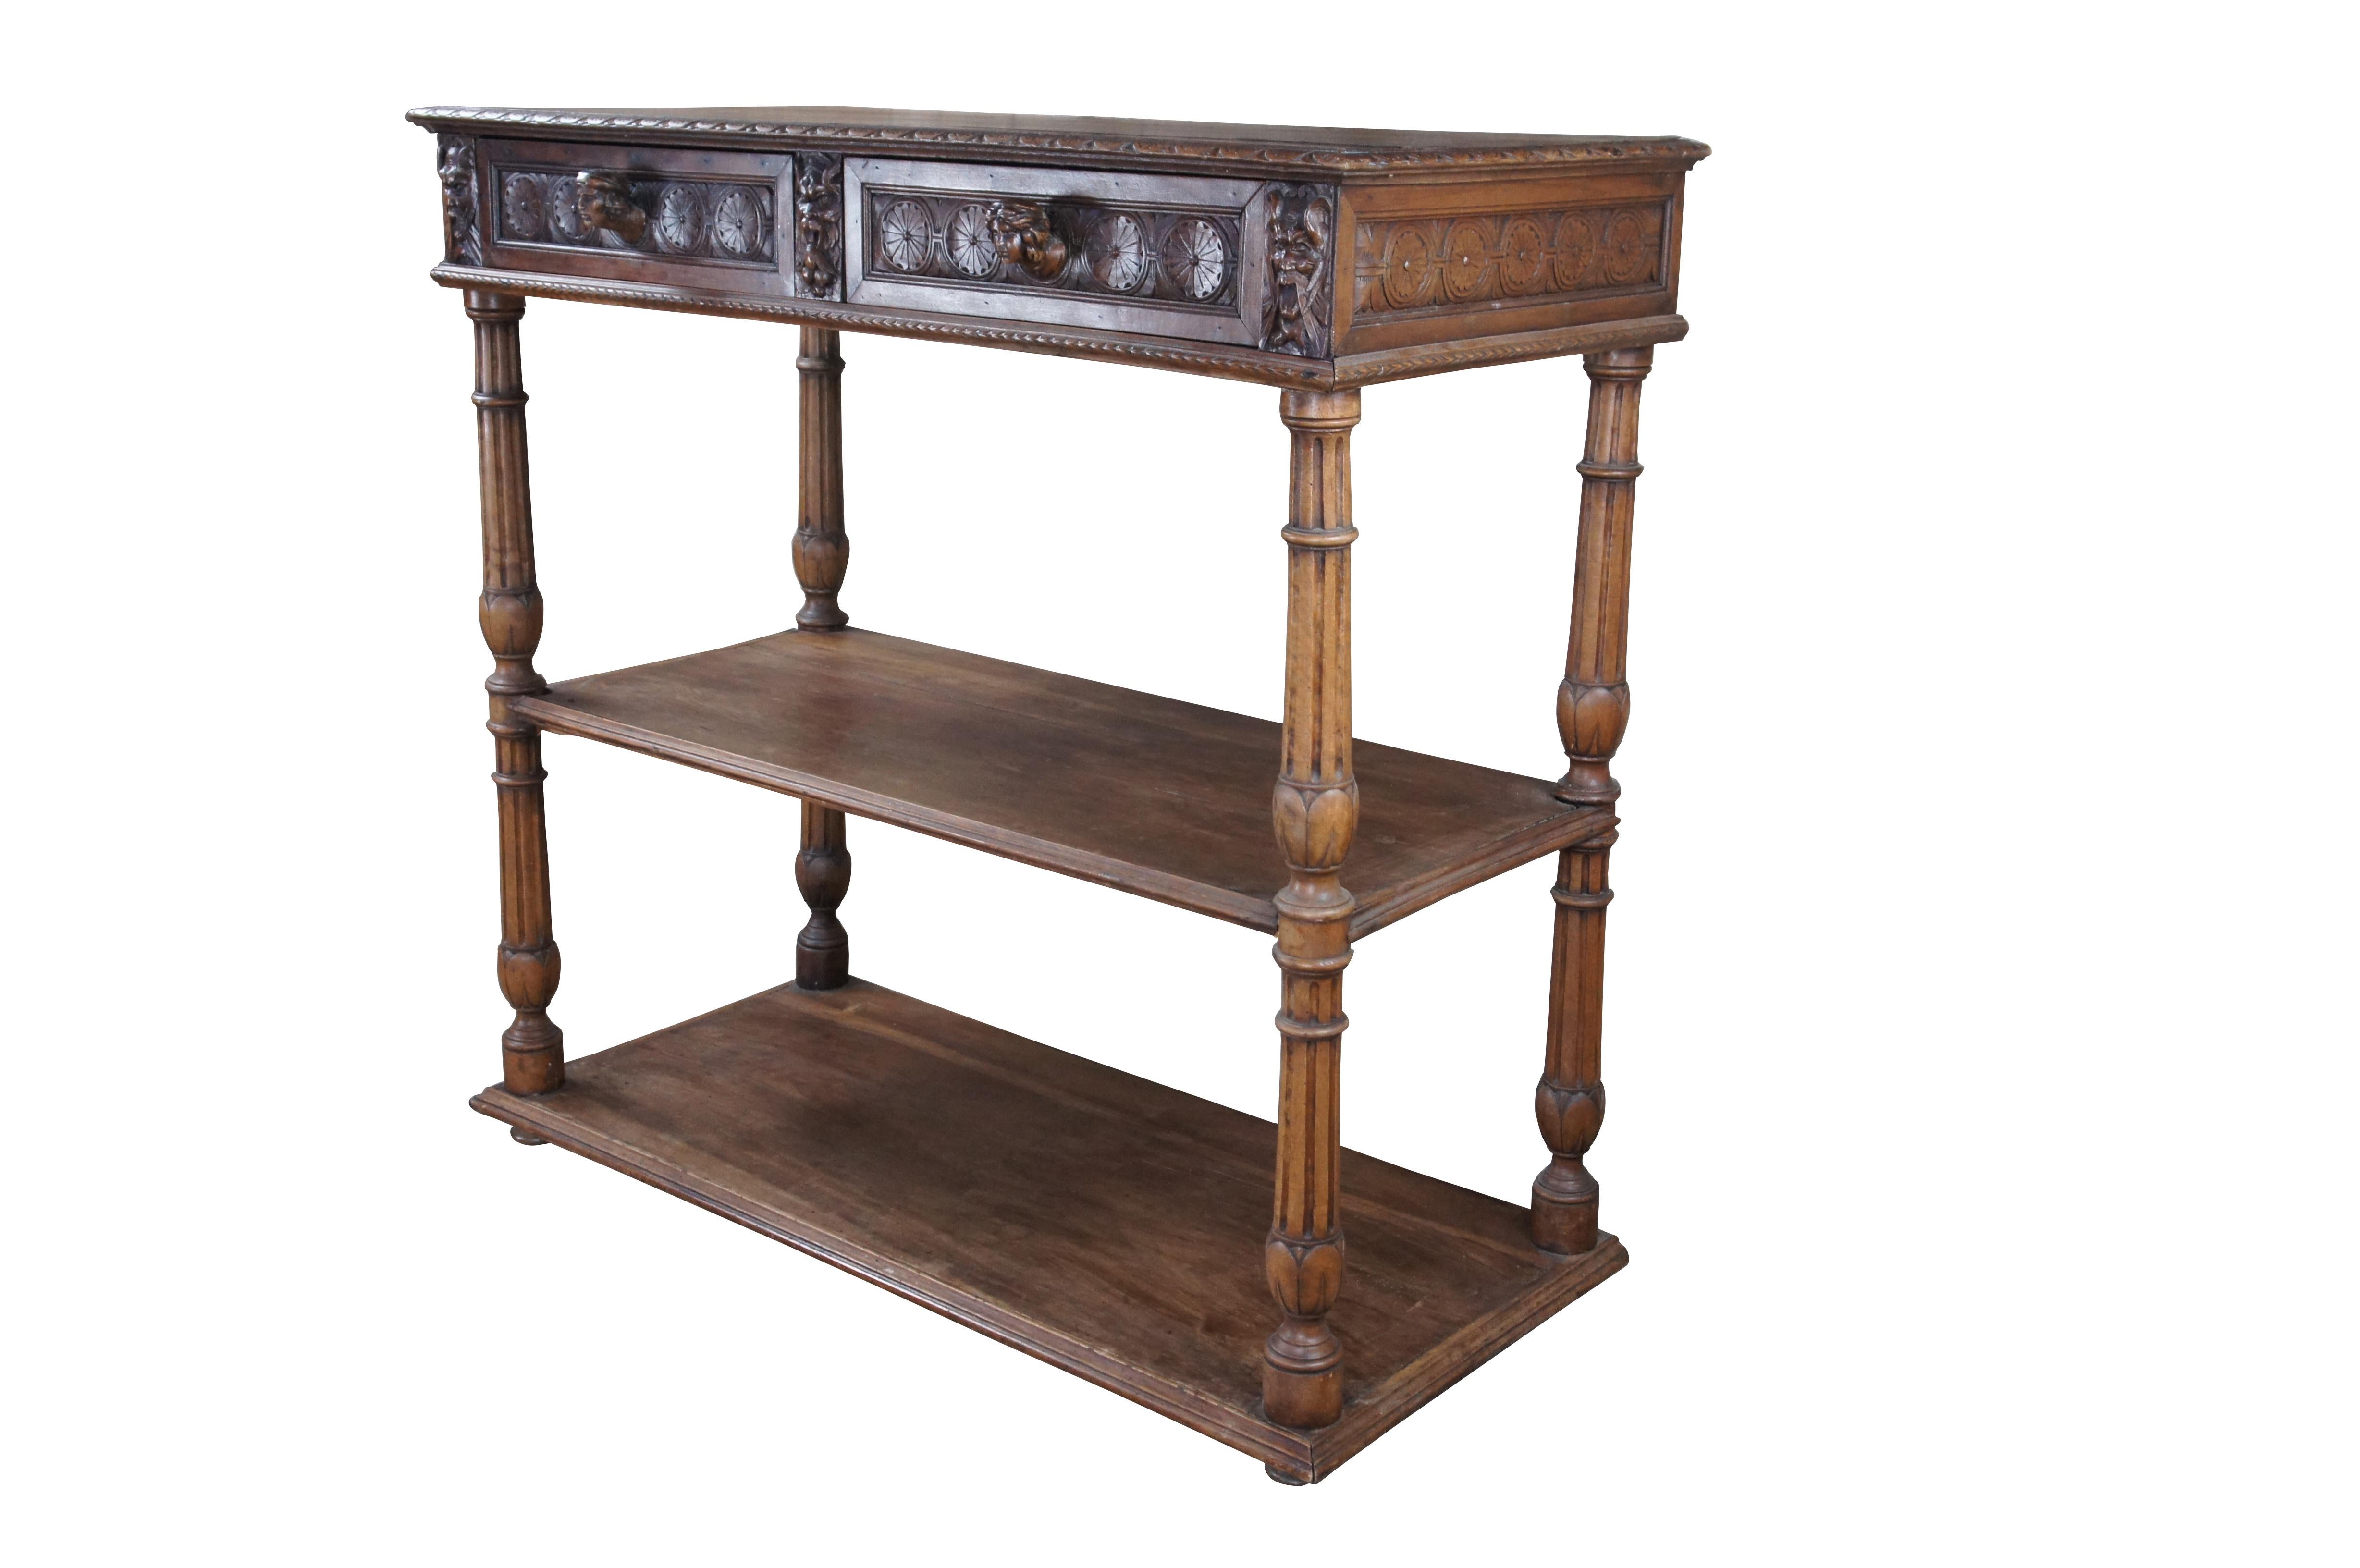 Late 19th Century French Renaissance Revival Buffet, Server or Sideboard. Originally called a Desserte, and used to display desserts. Features a rectangular tiered frame crafted from walnut. The upper surface showcases a bevel trimmed edge with egg